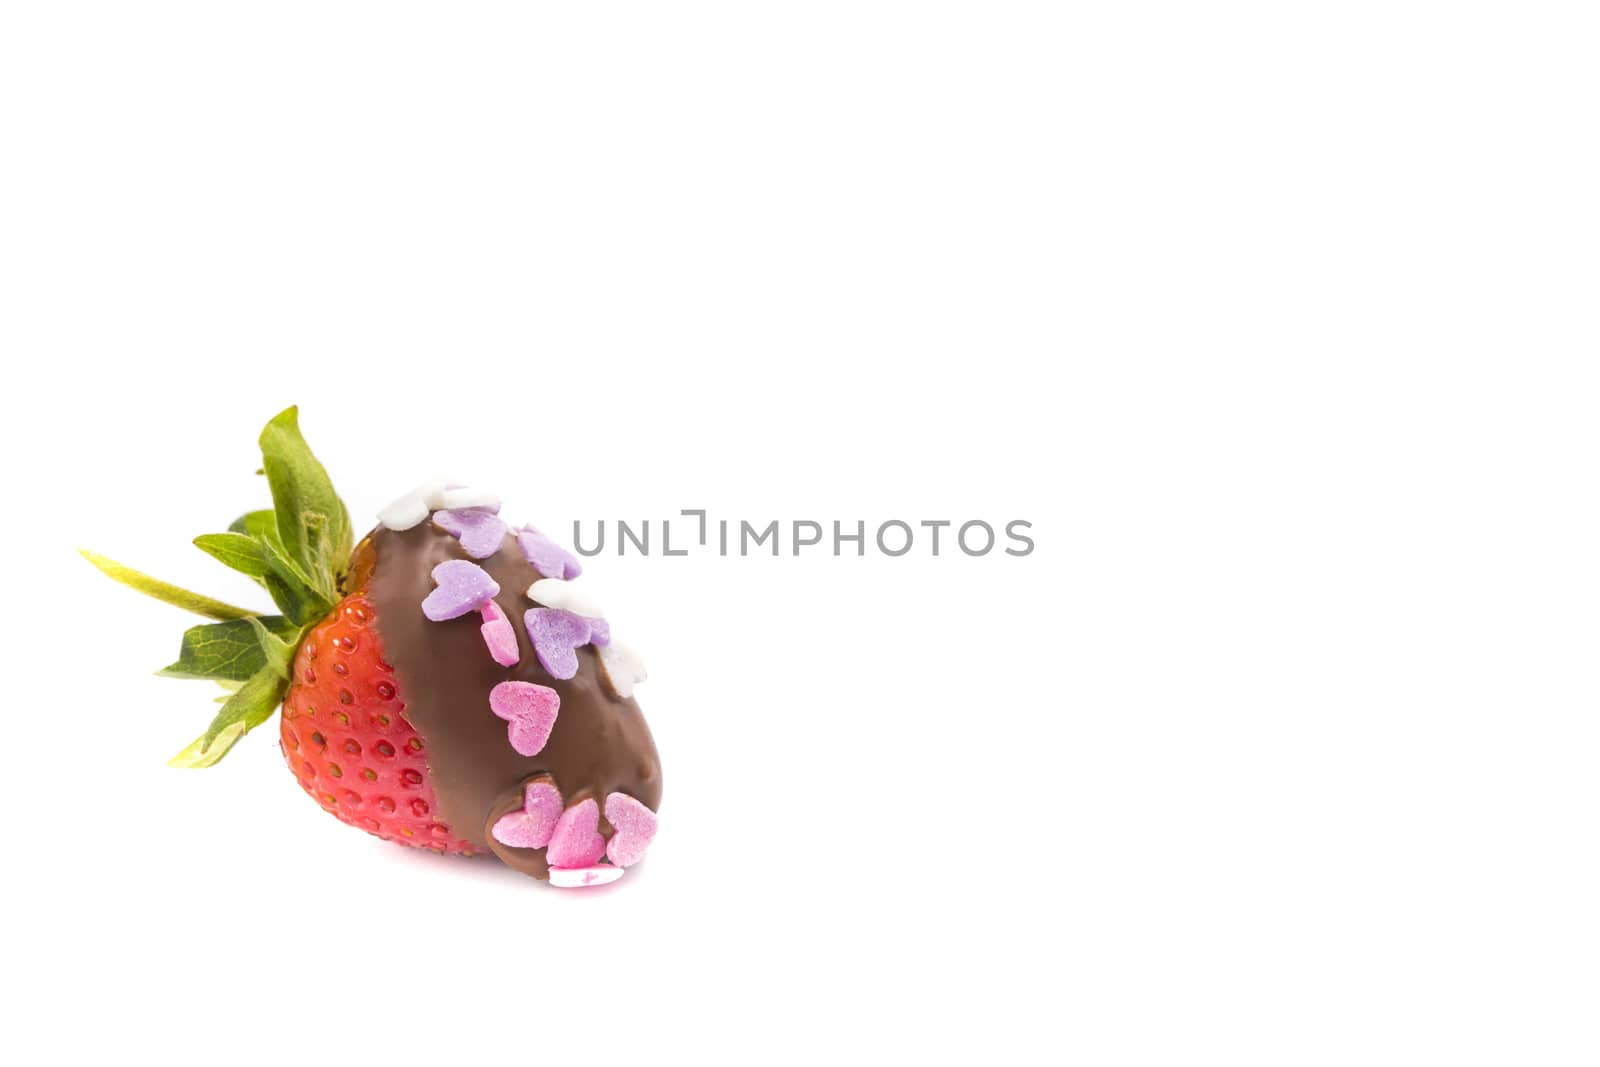 a chocolate coated strawberry with small heart-shape sugar confetti, isolated on white background, Valentine